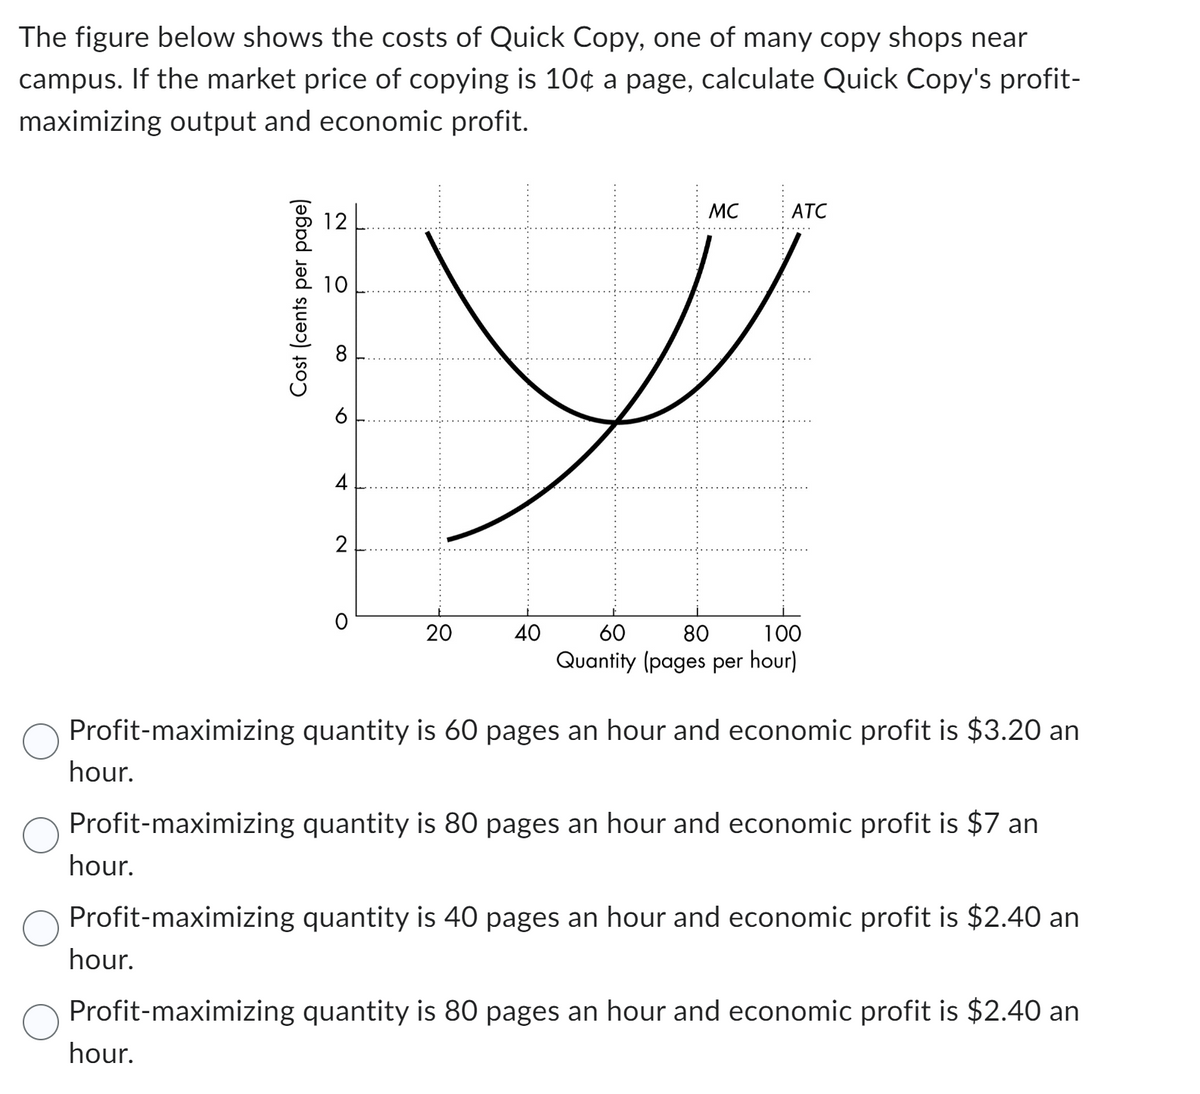 The figure below shows the costs of Quick Copy, one of many copy shops near
campus. If the market price of copying is 10¢ a page, calculate Quick Copy's profit-
maximizing output and economic profit.
hour.
hour.
Cost (cents per page)
12
hour.
10
4
100
60
80
Quantity (pages per hour)
Profit-maximizing quantity is 60 pages an hour and economic profit is $3.20 an
hour.
2
20
MC
40
Profit-maximizing quantity is 80 pages an hour and economic profit is $7 an
ATC
Profit-maximizing quantity is 40 pages an hour and economic profit is $2.40 an
Profit-maximizing quantity is 80 pages an hour and economic profit is $2.40 an